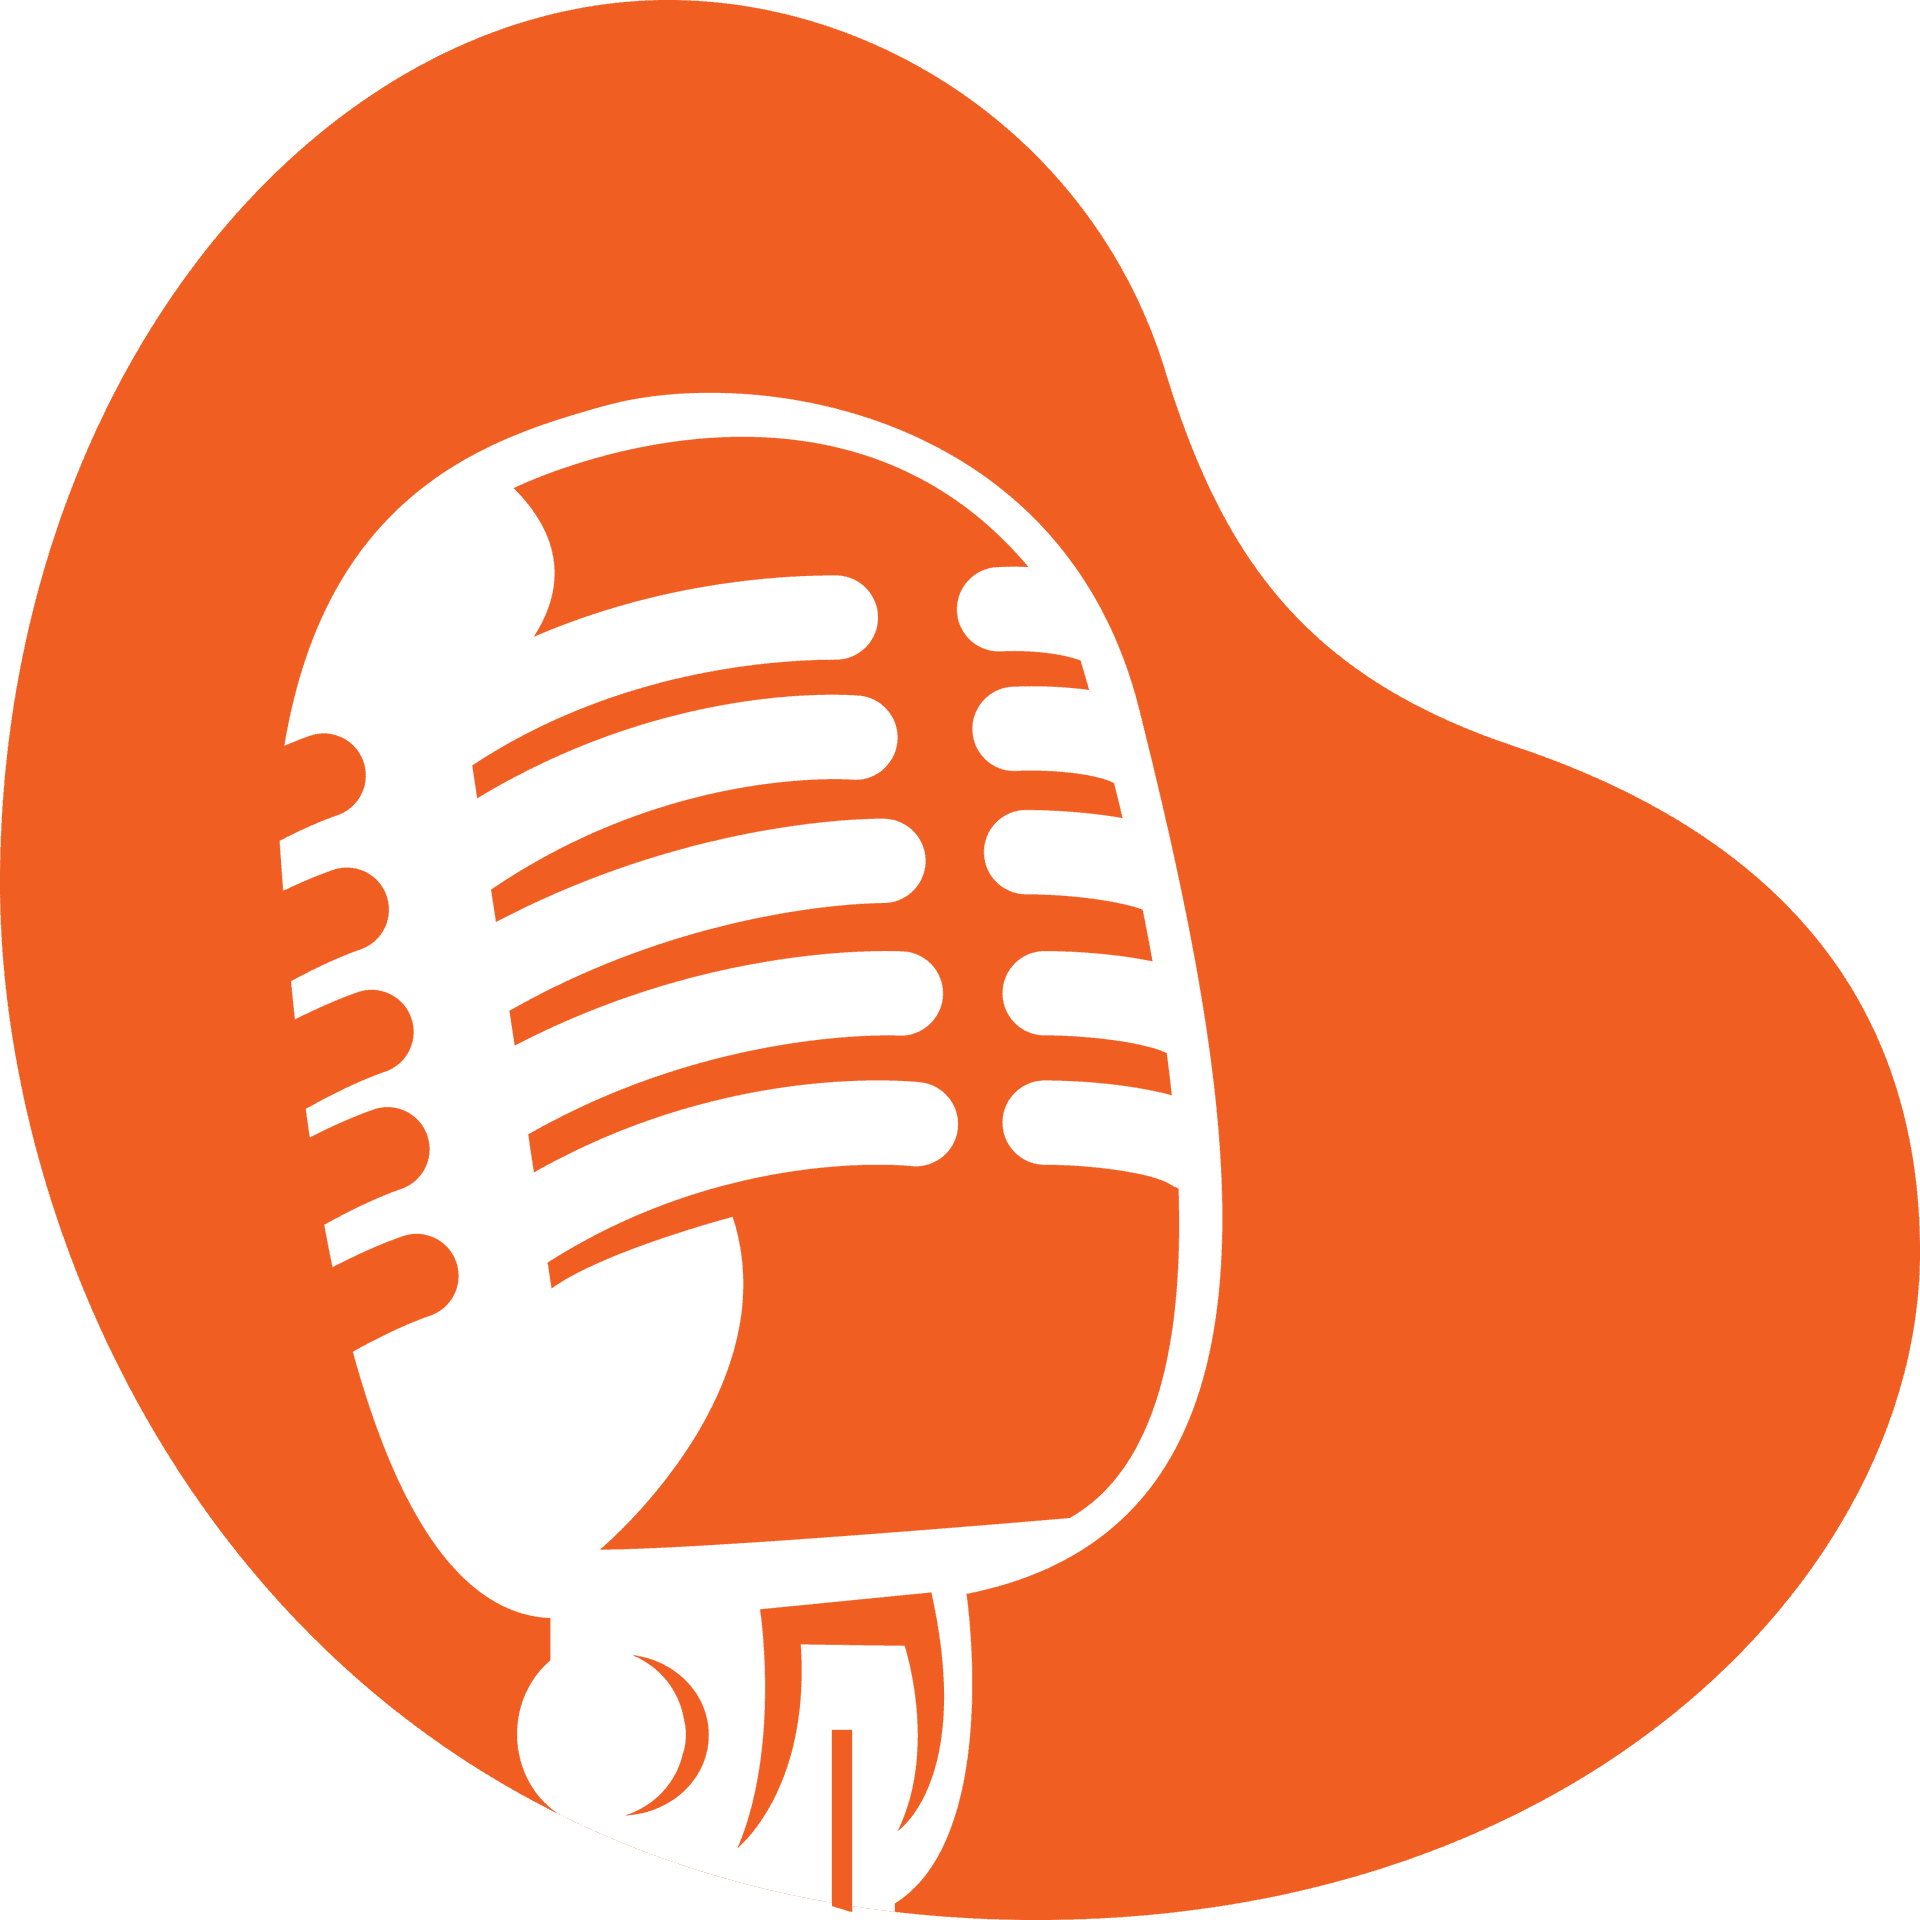 Podcast Microphone Icon PNG